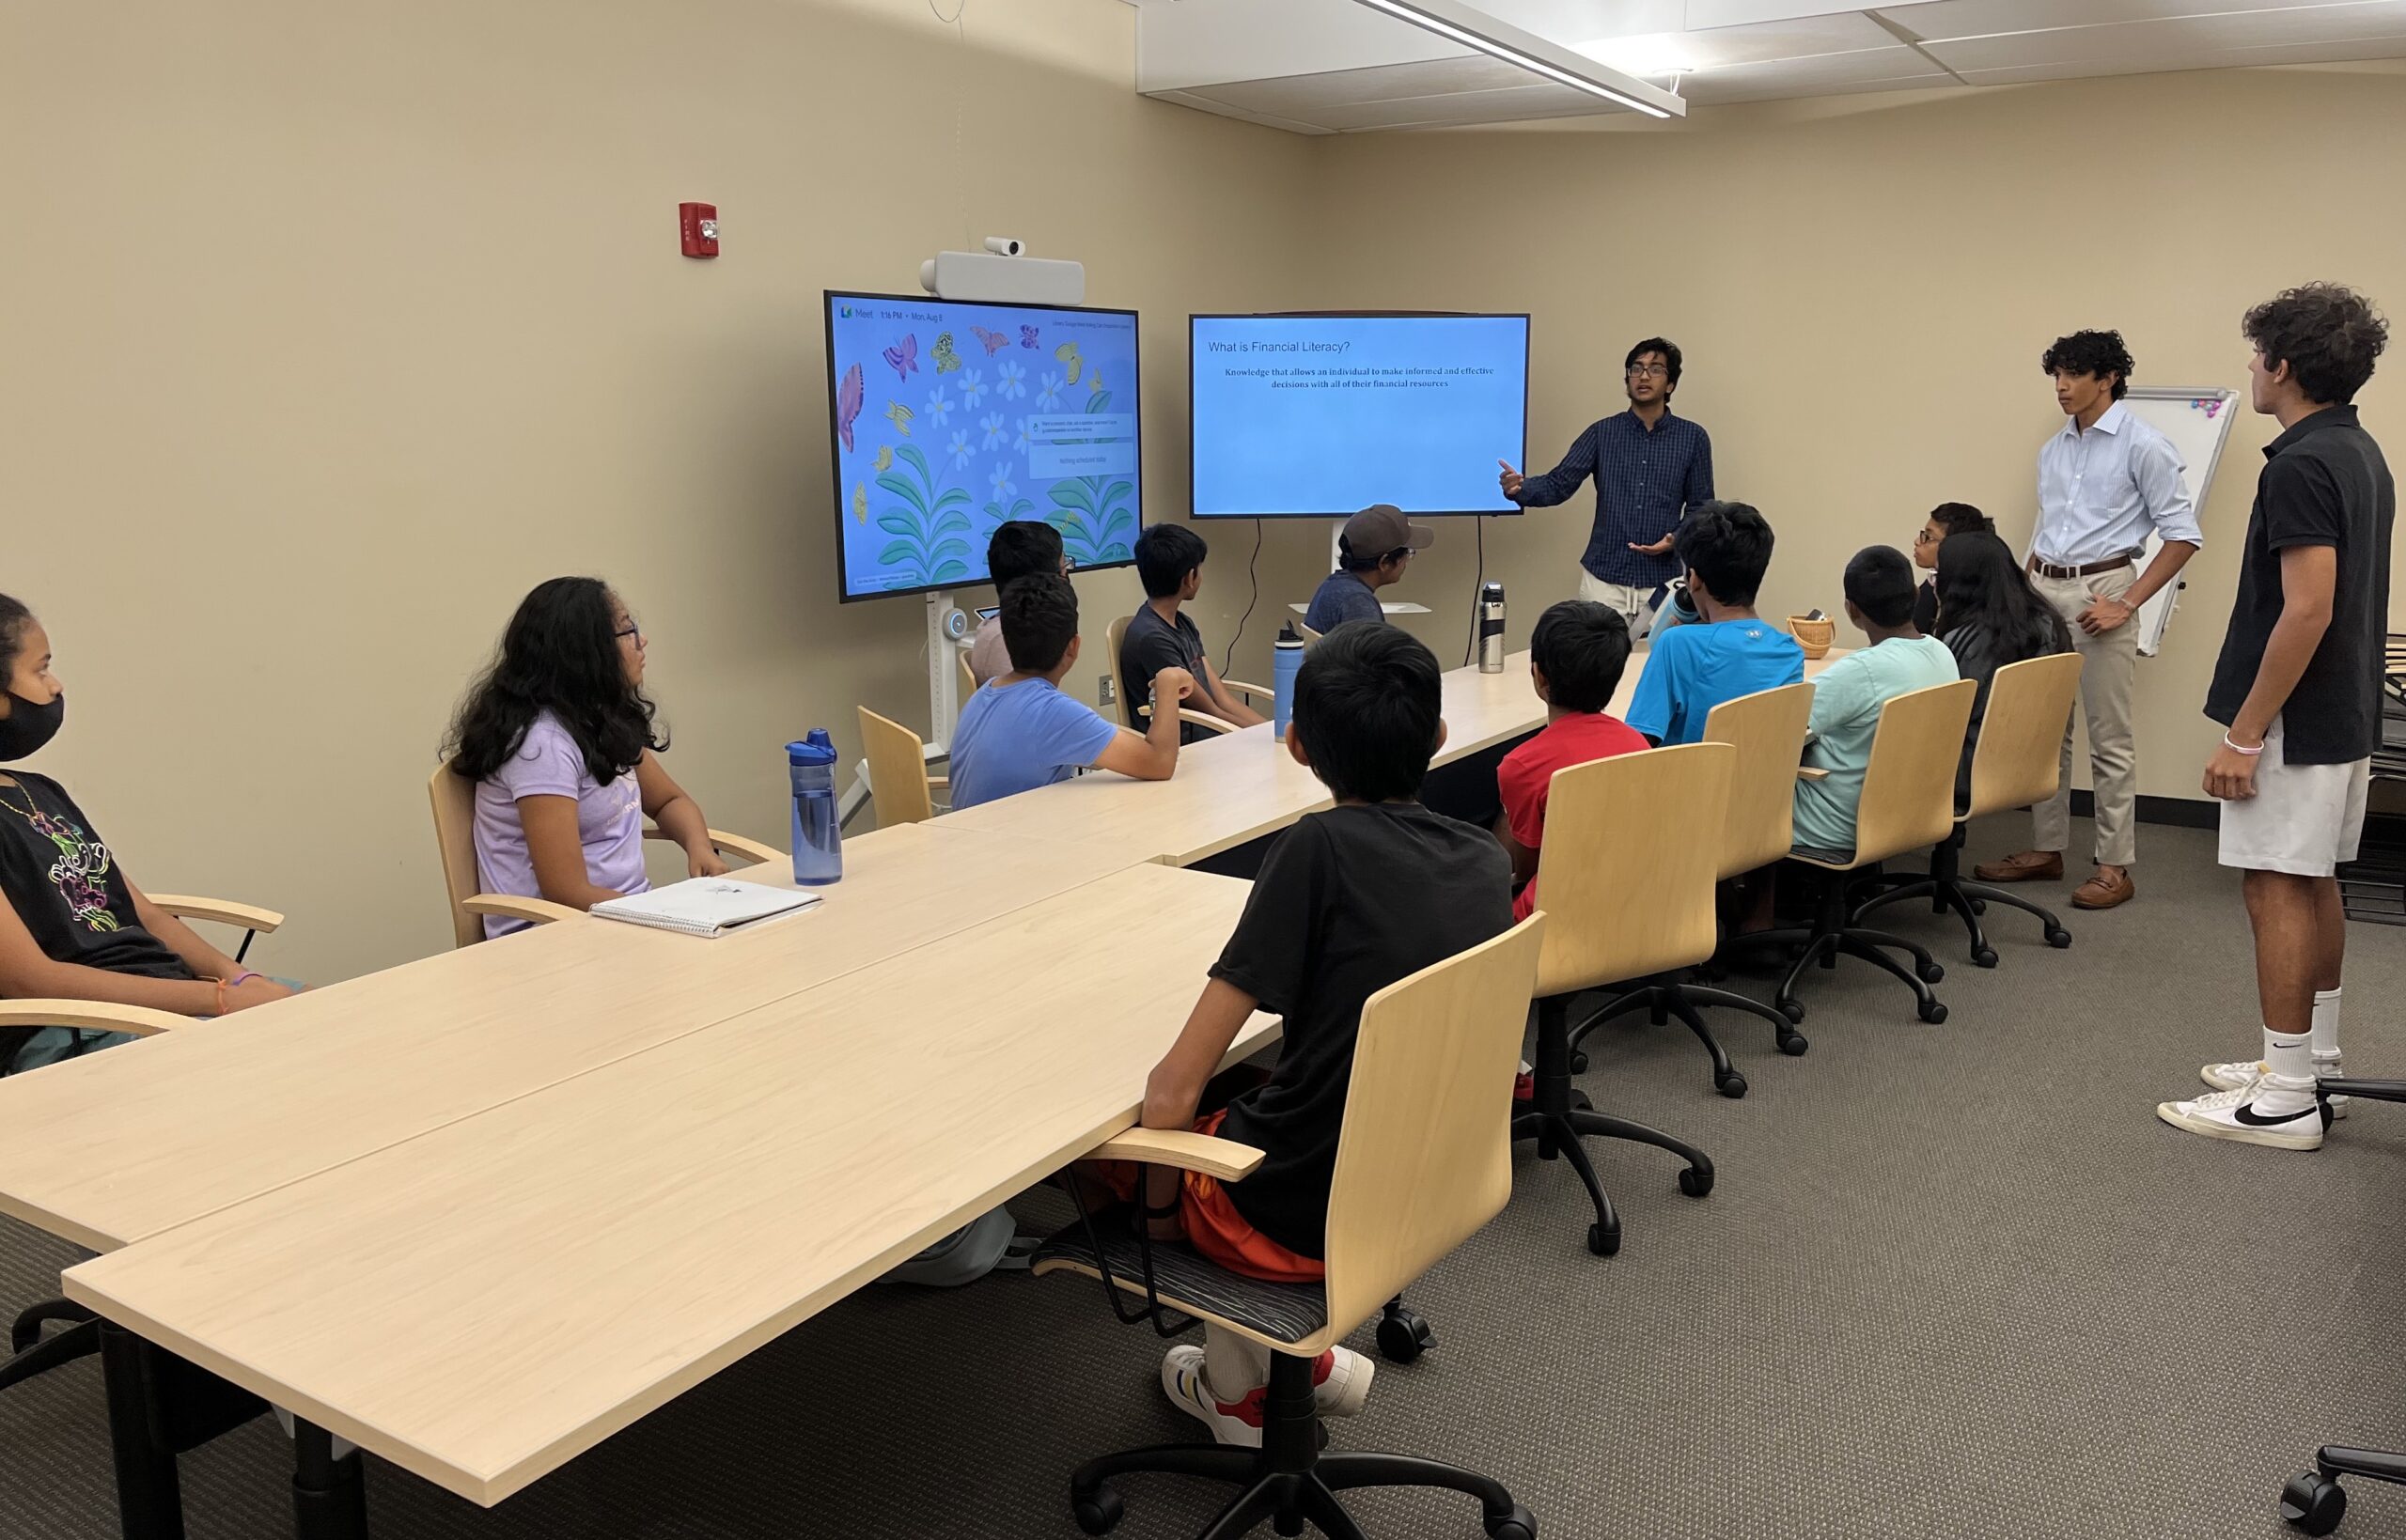 Middle schoolers learn about finance, entrepreneurship at business camp